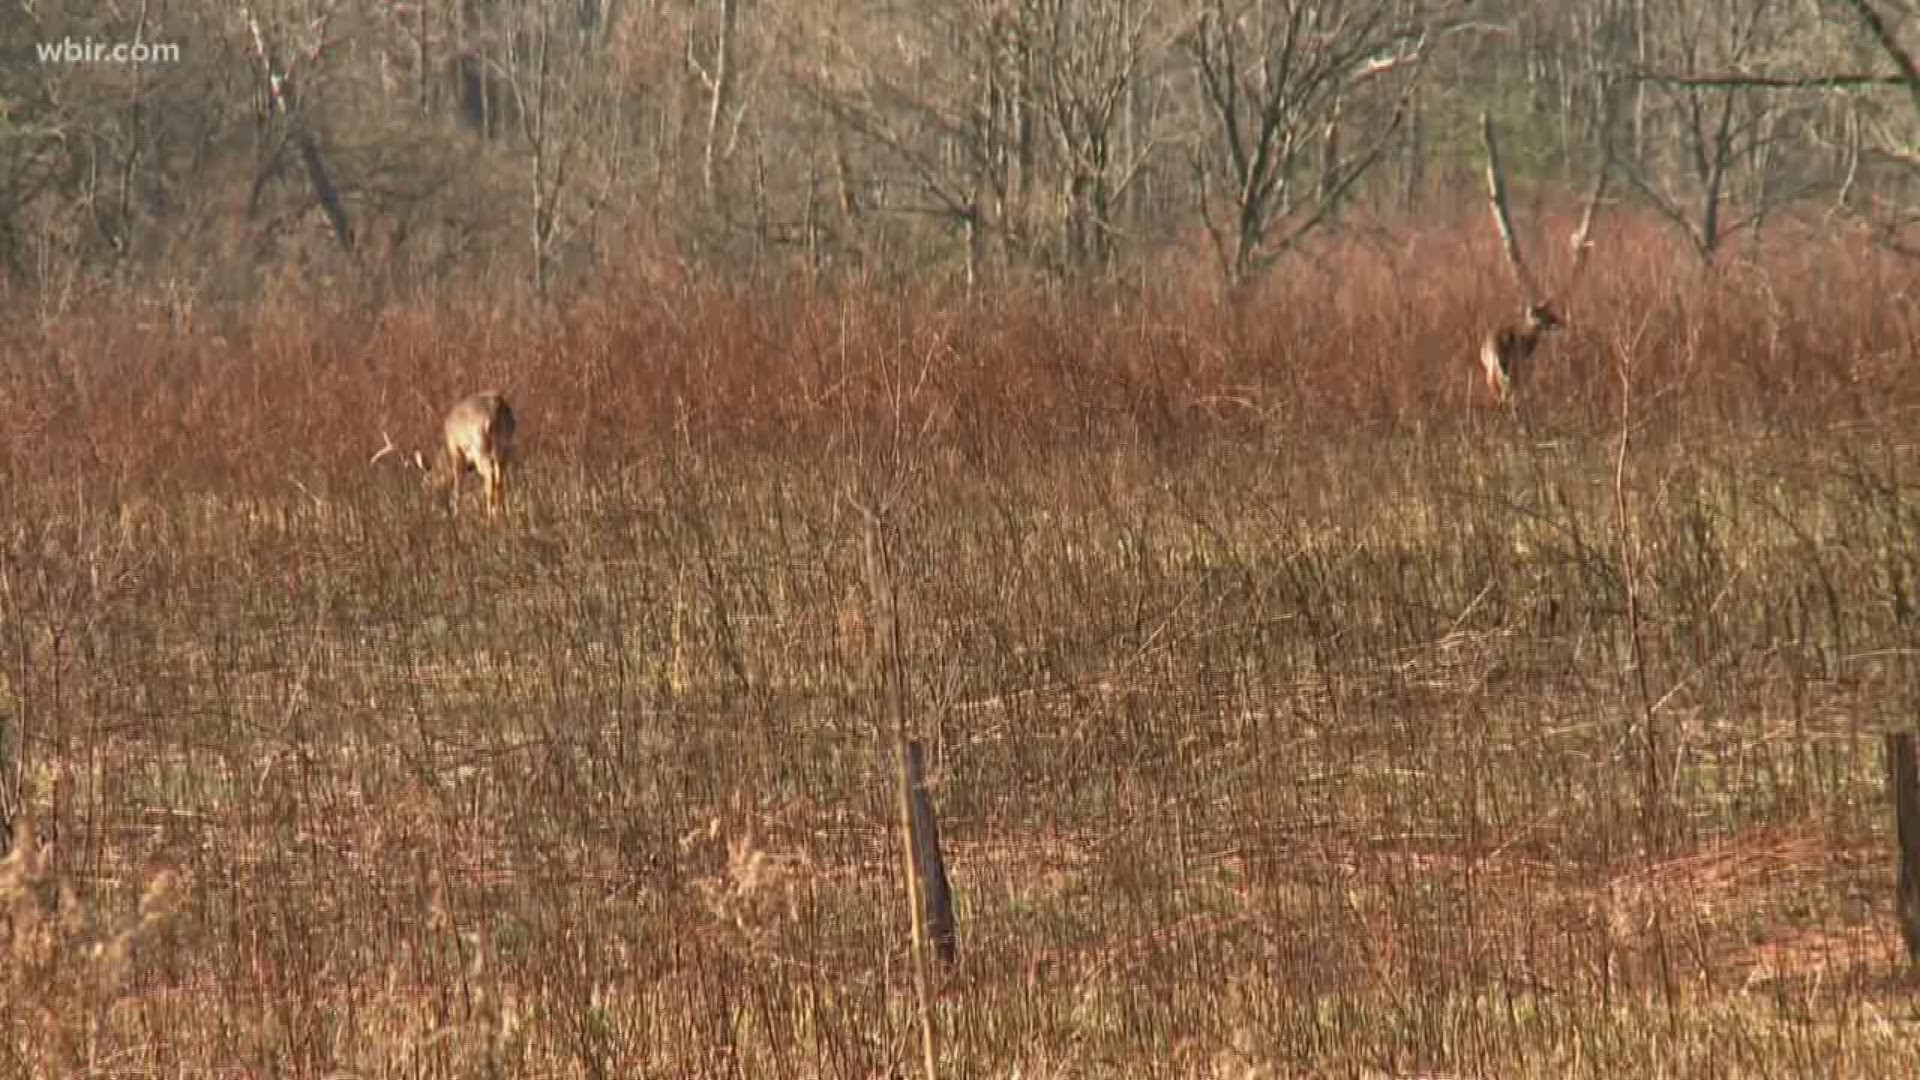 State wild life agents say there are now 62 confirmed cases of chronic wasting disease.